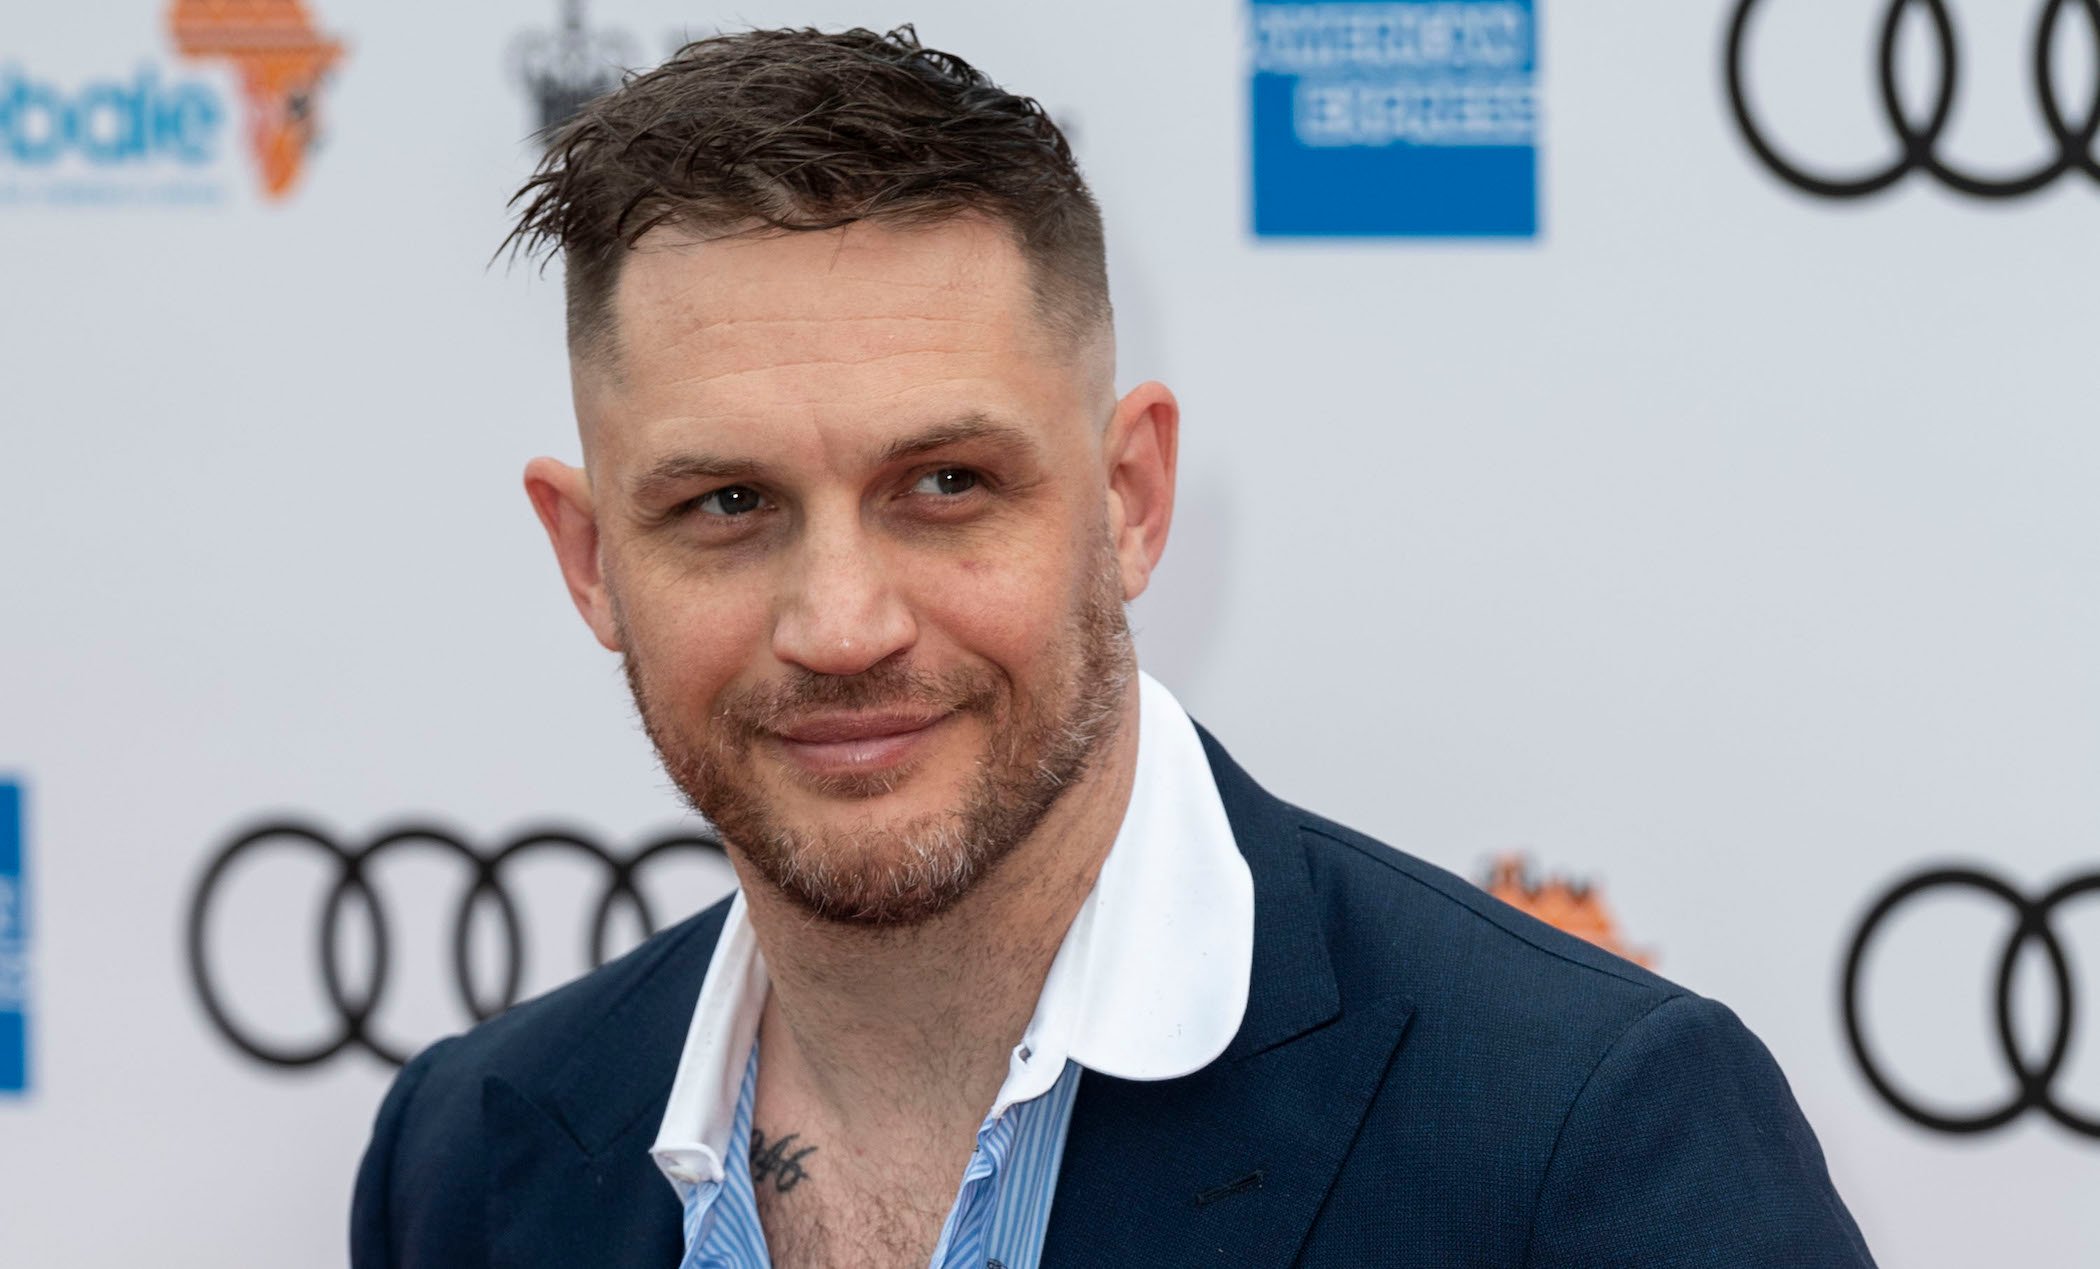 Tom Hardy, actor who may play Alfie Solomons in 'Peaky Blinders' Season 6, smiling at an event